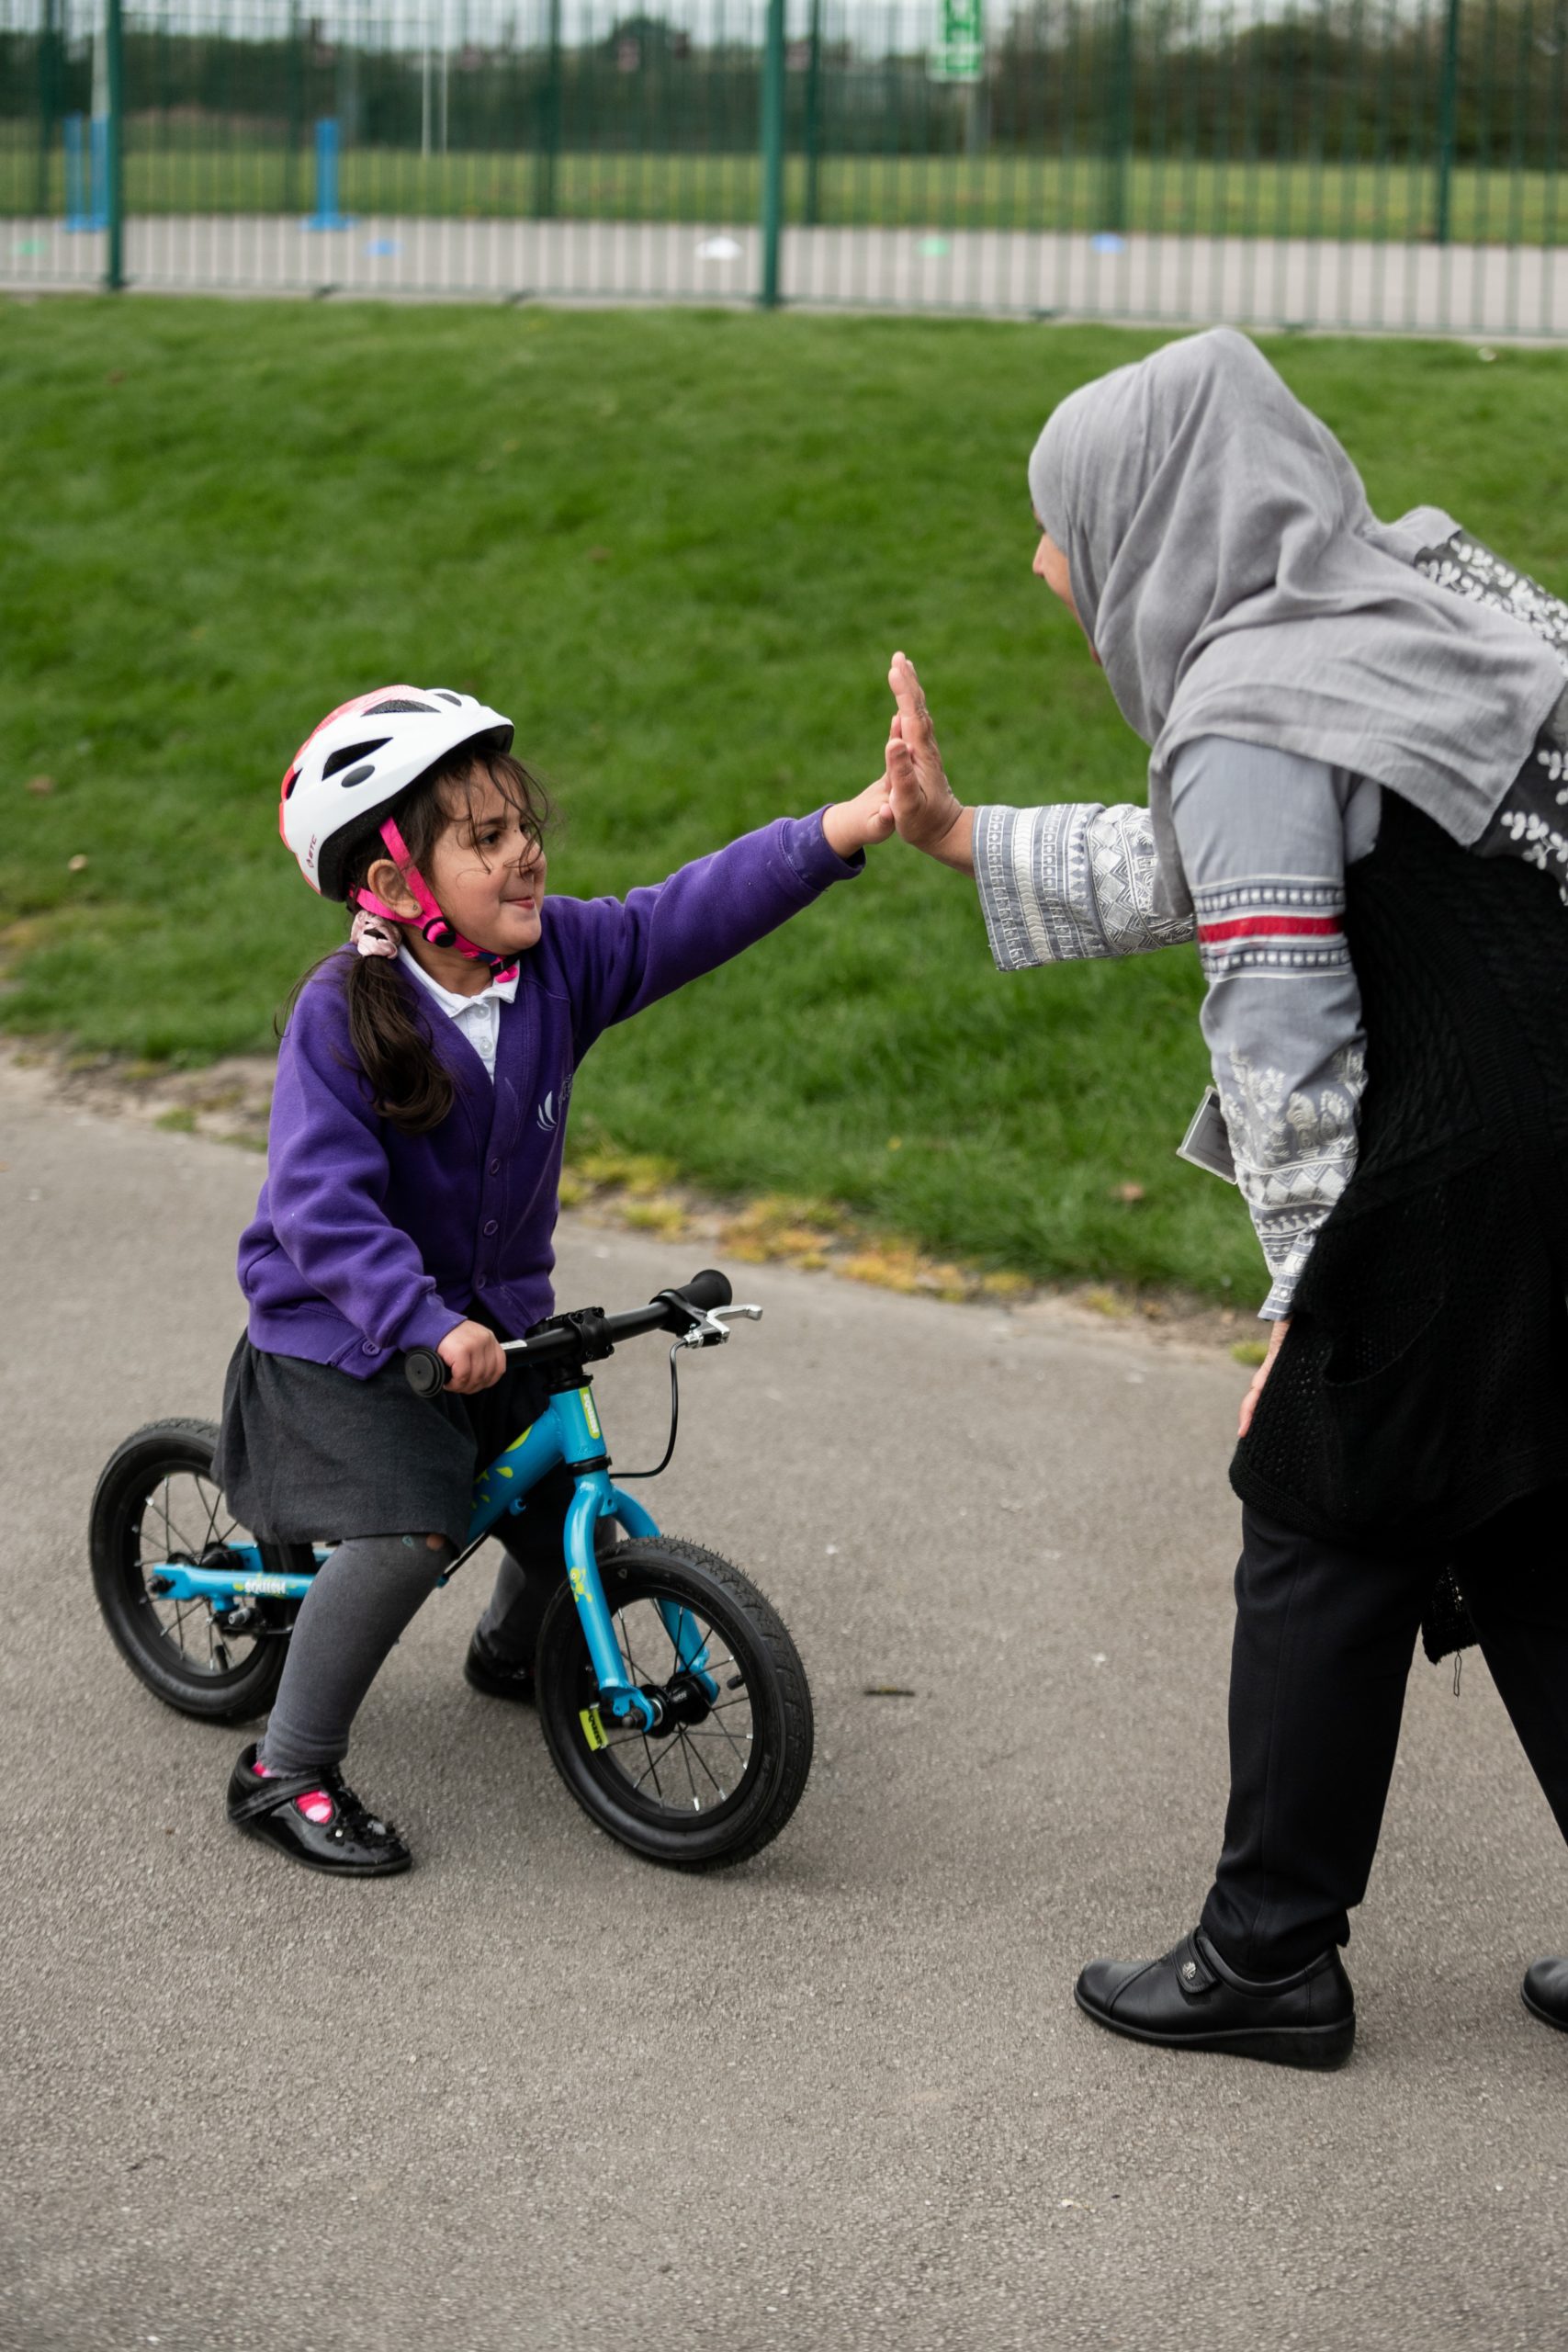 A young girl riding a balance bike high fives a woman on a playground.